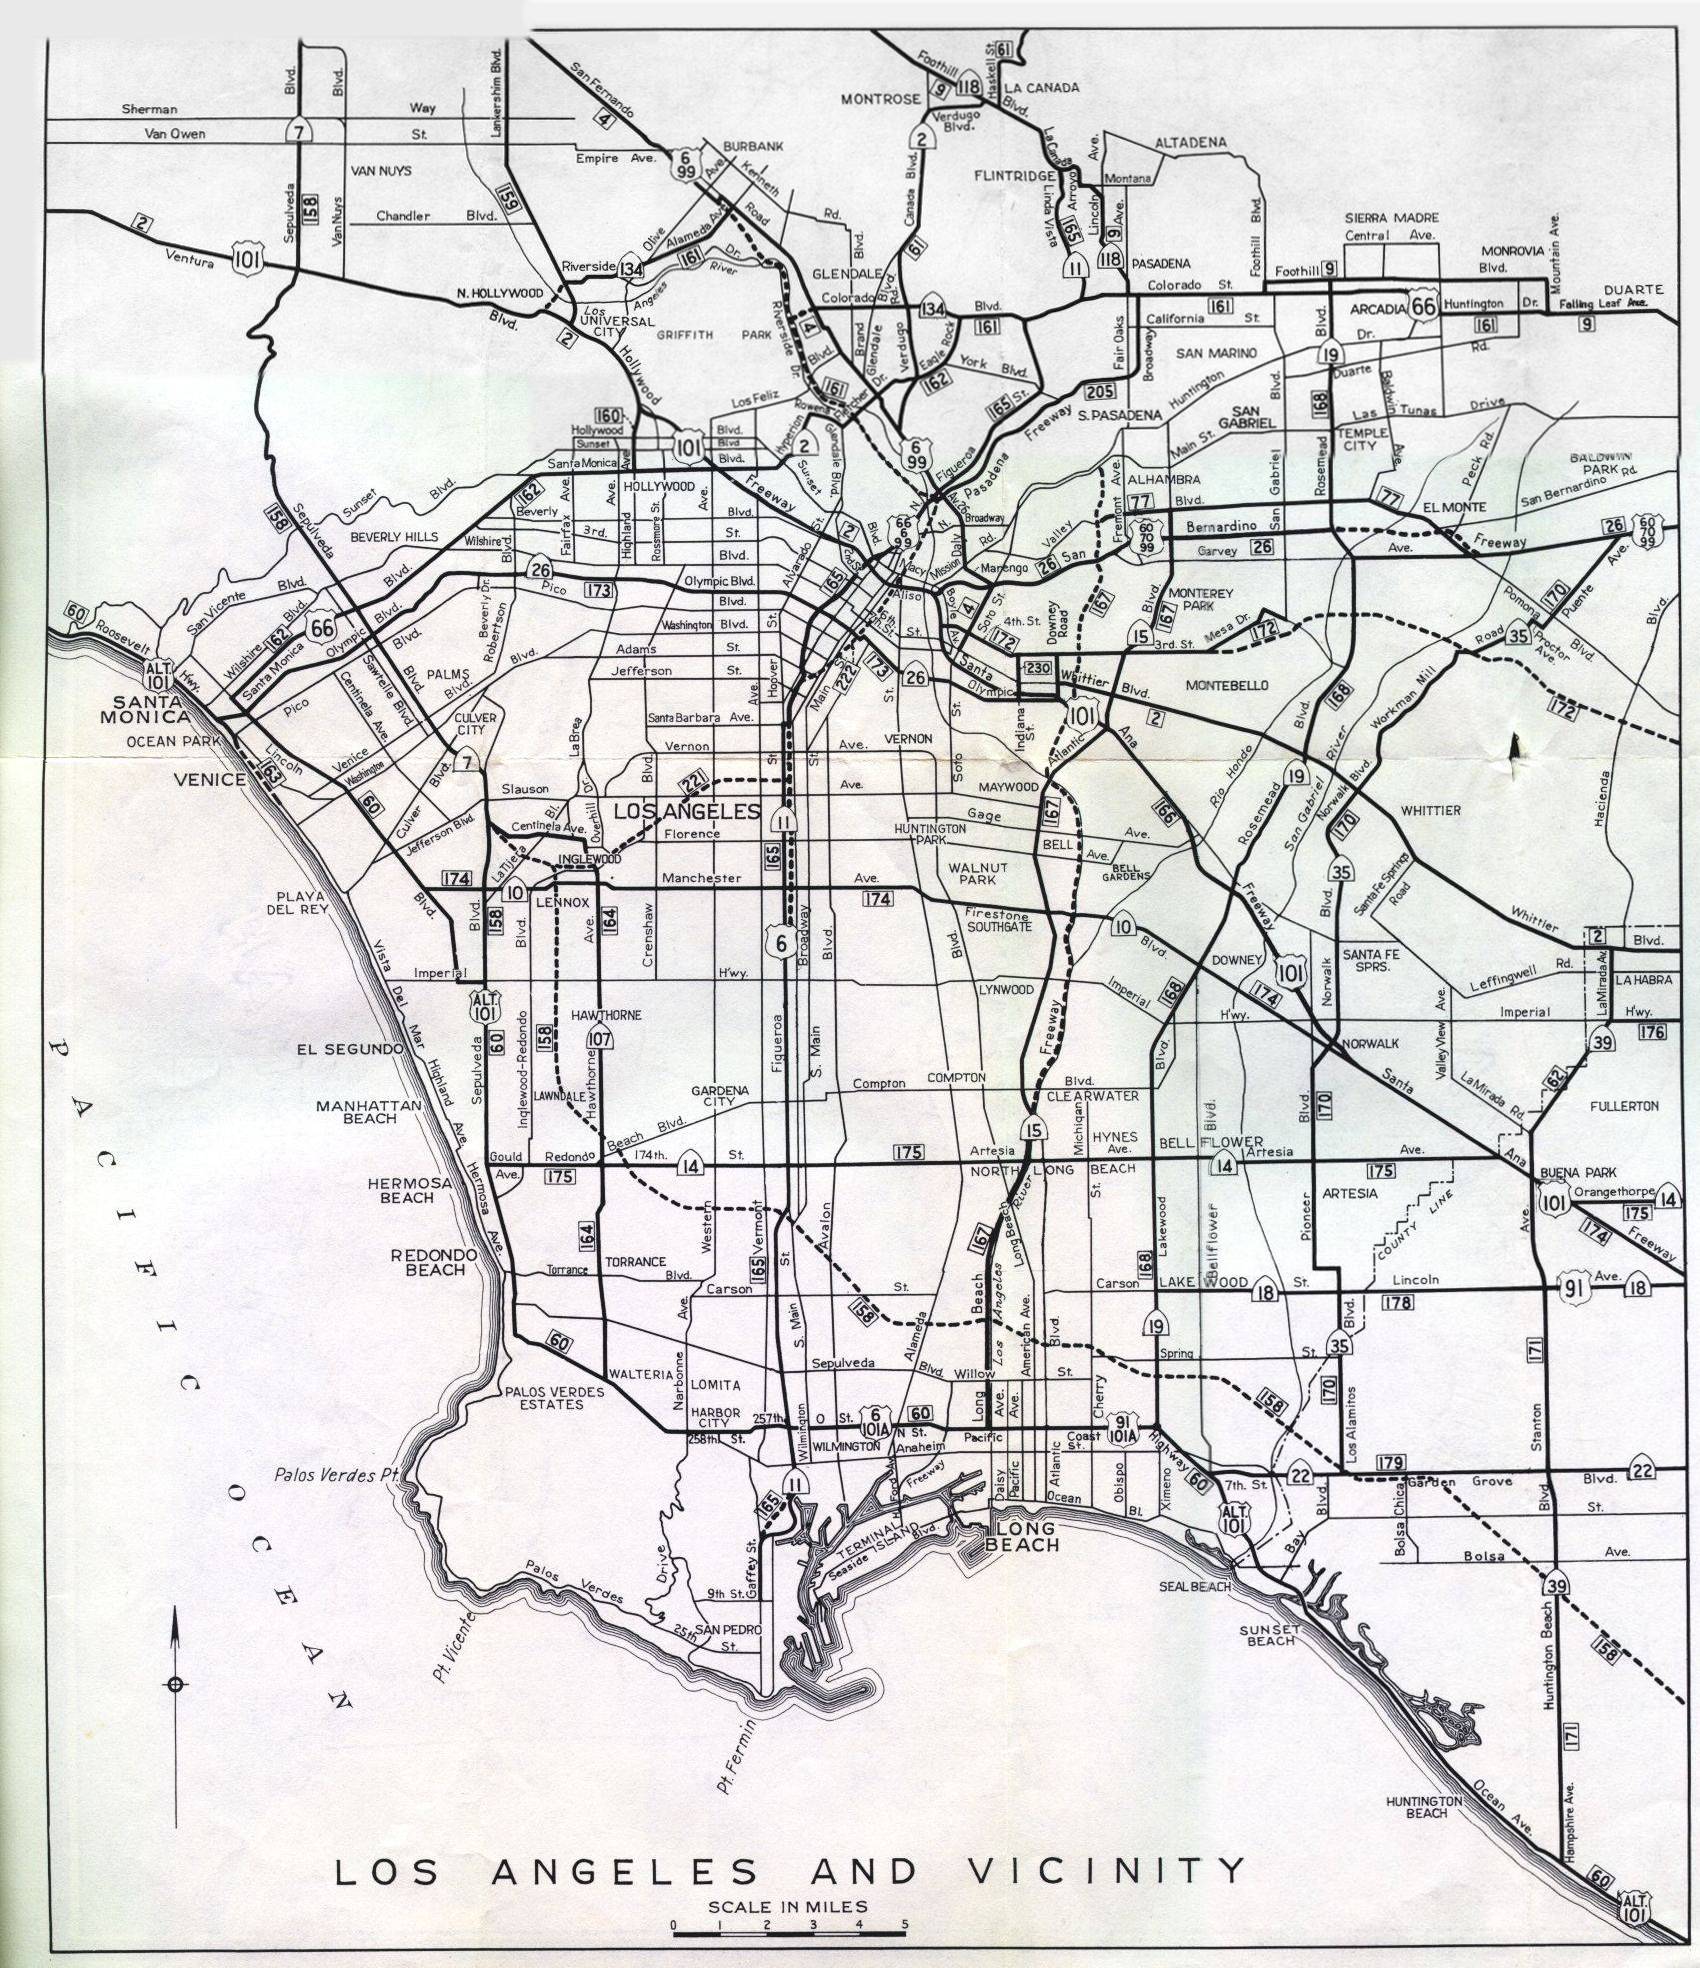 Official detail map for Los Angeles (1956)